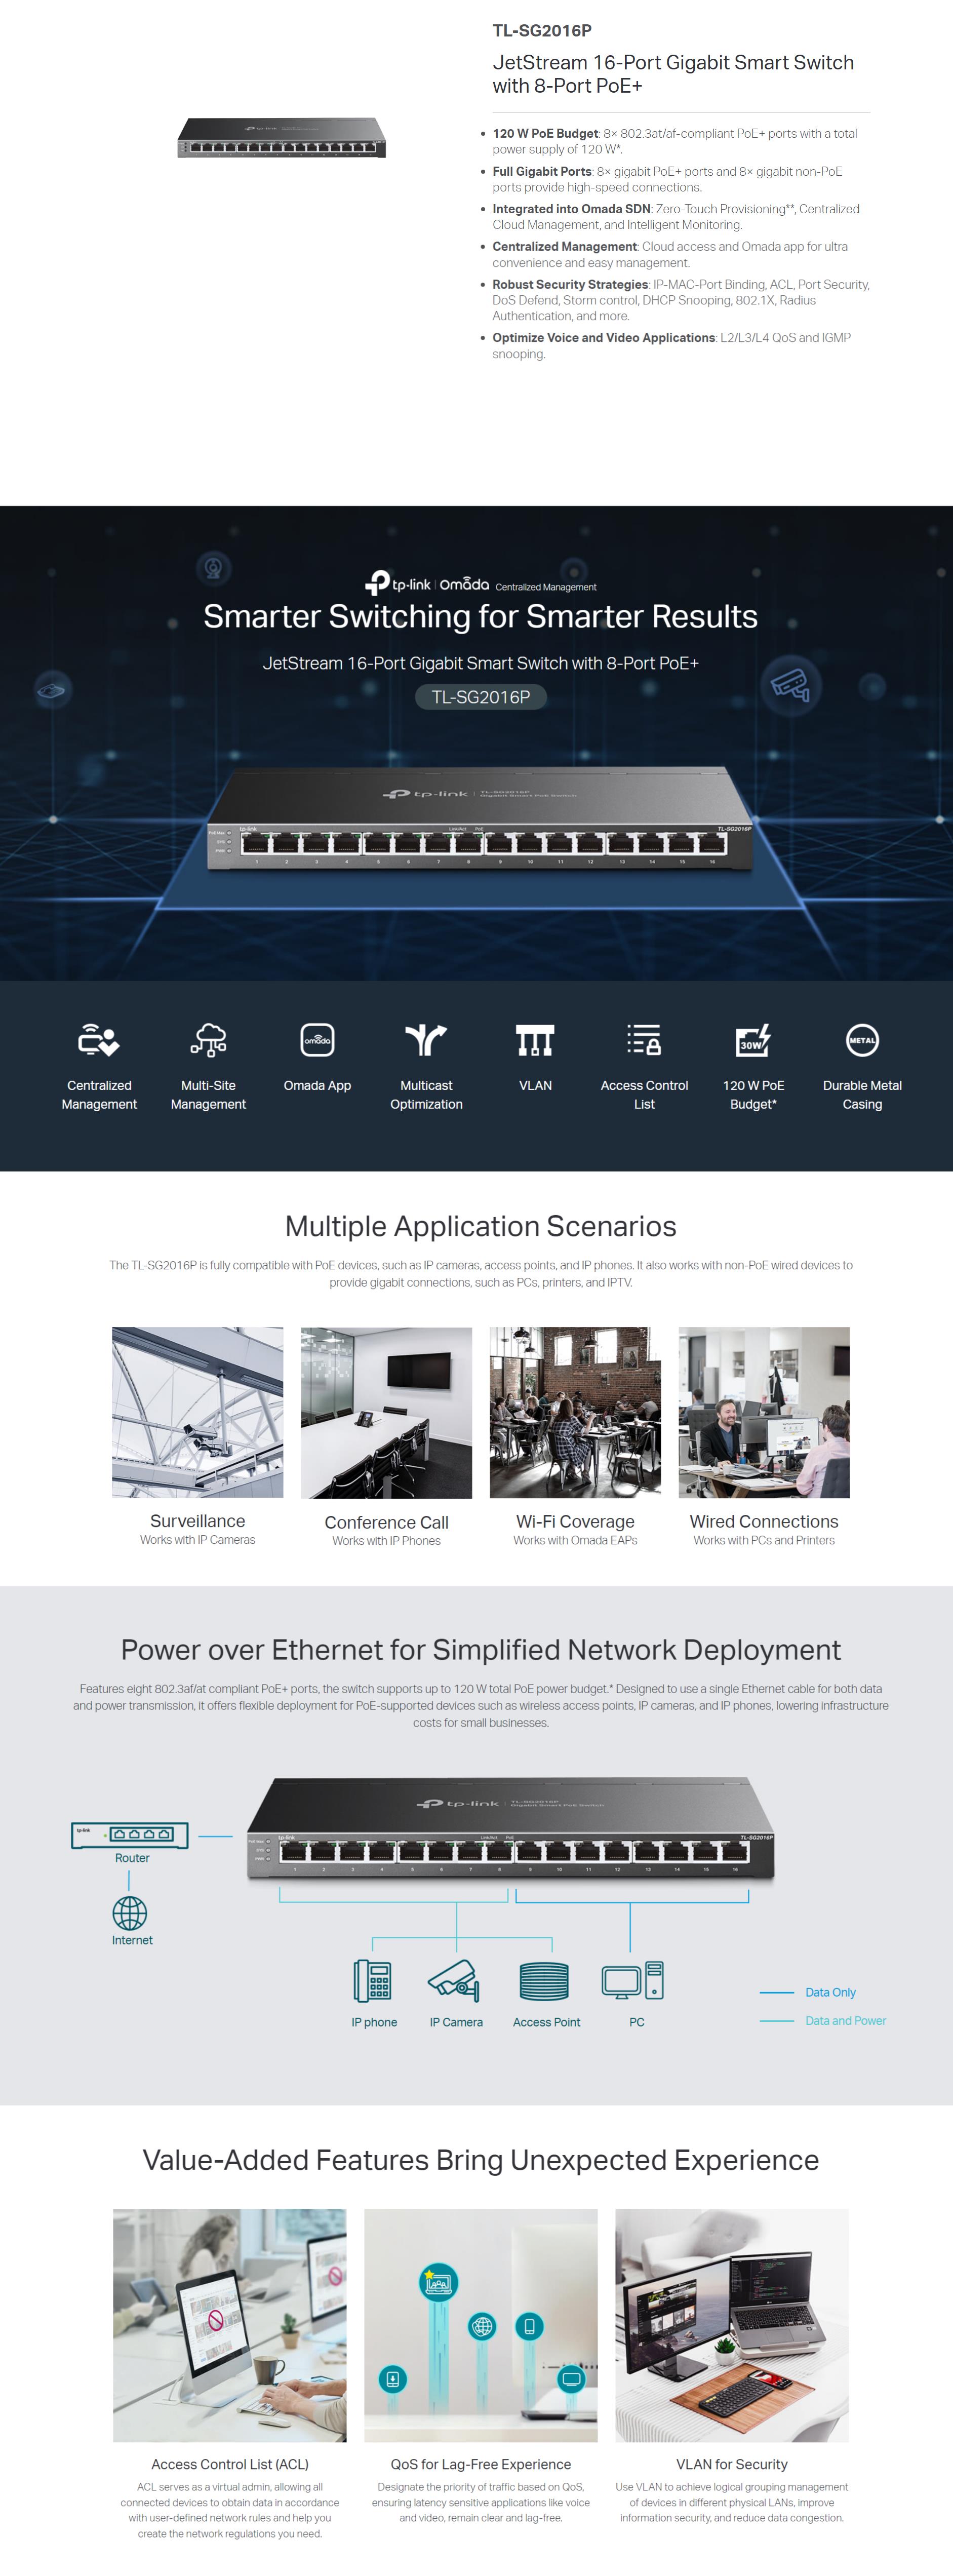 A large marketing image providing additional information about the product TP-Link JetStream TL-SG2016P - 16-Port Gigabit Smart Switch with 8-Port PoE+ - Additional alt info not provided